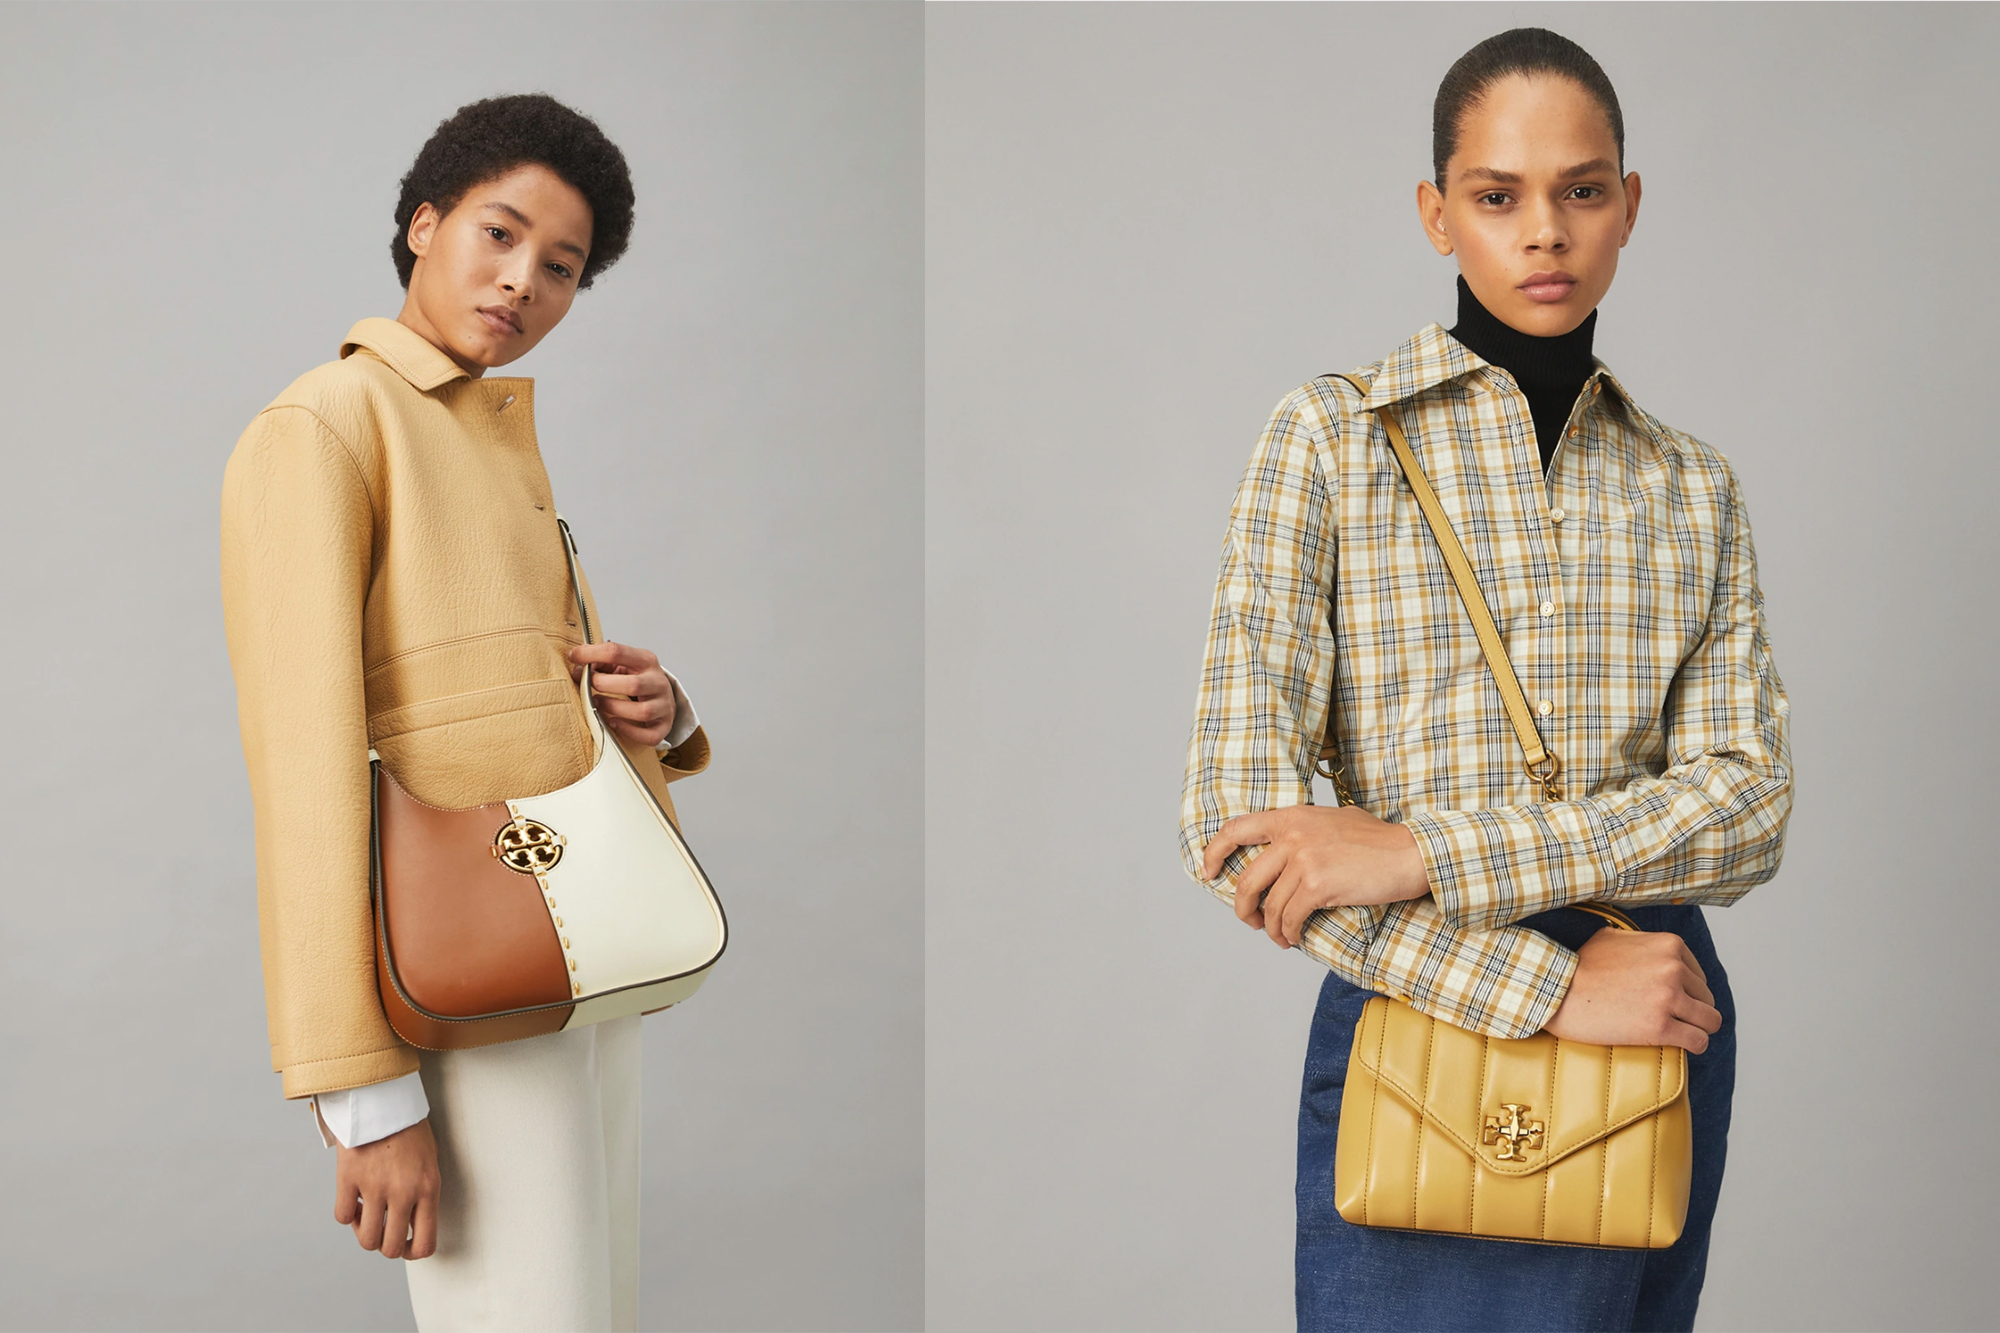 Shop: Chic Neutral Pieces From The Tory Burch Fall Winter 2021 Collection